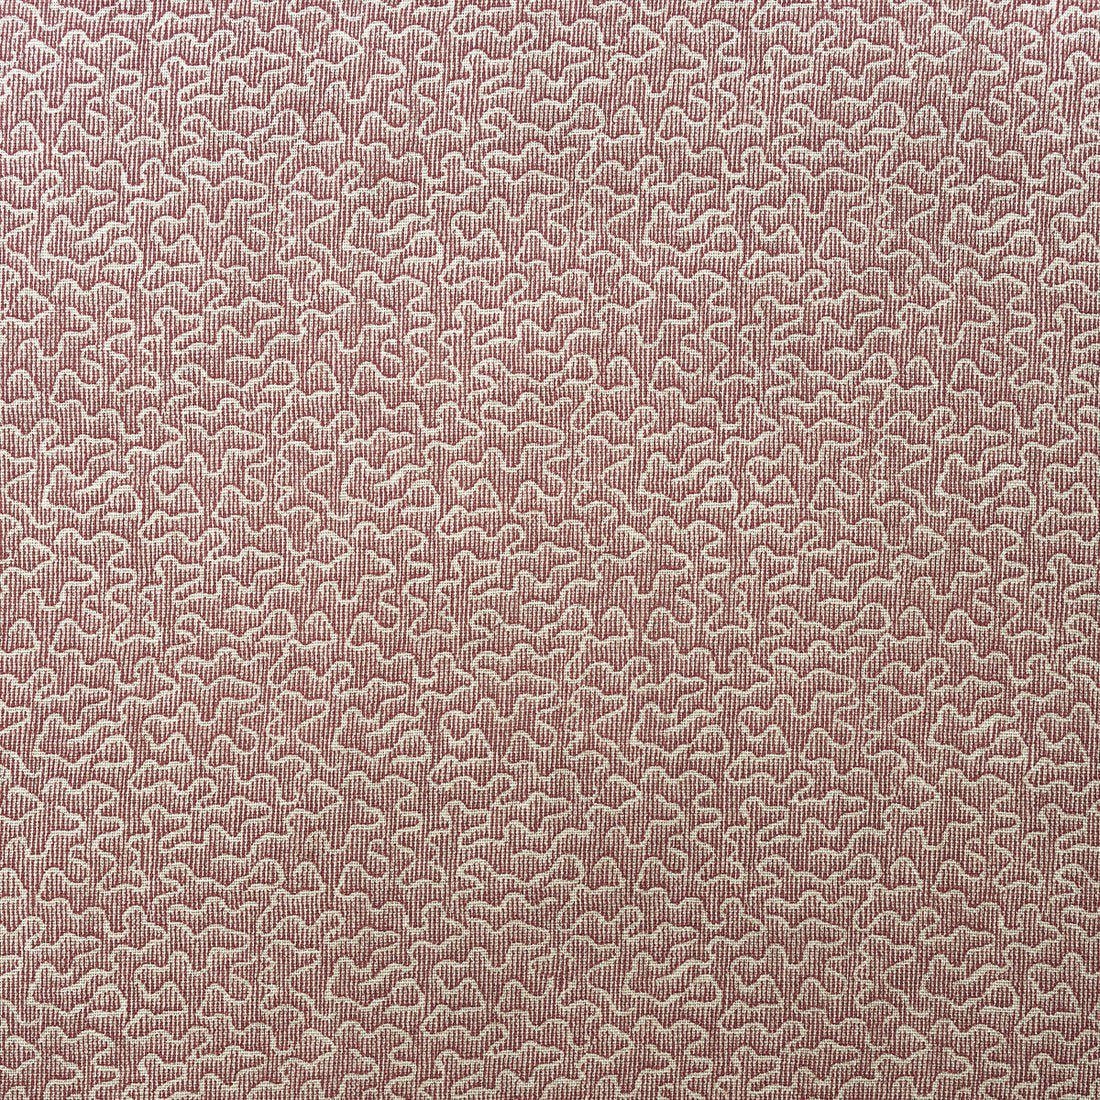 Pollen fabric in pink color - pattern AM100383.77.0 - by Kravet Couture in the Andrew Martin Garden Path collection